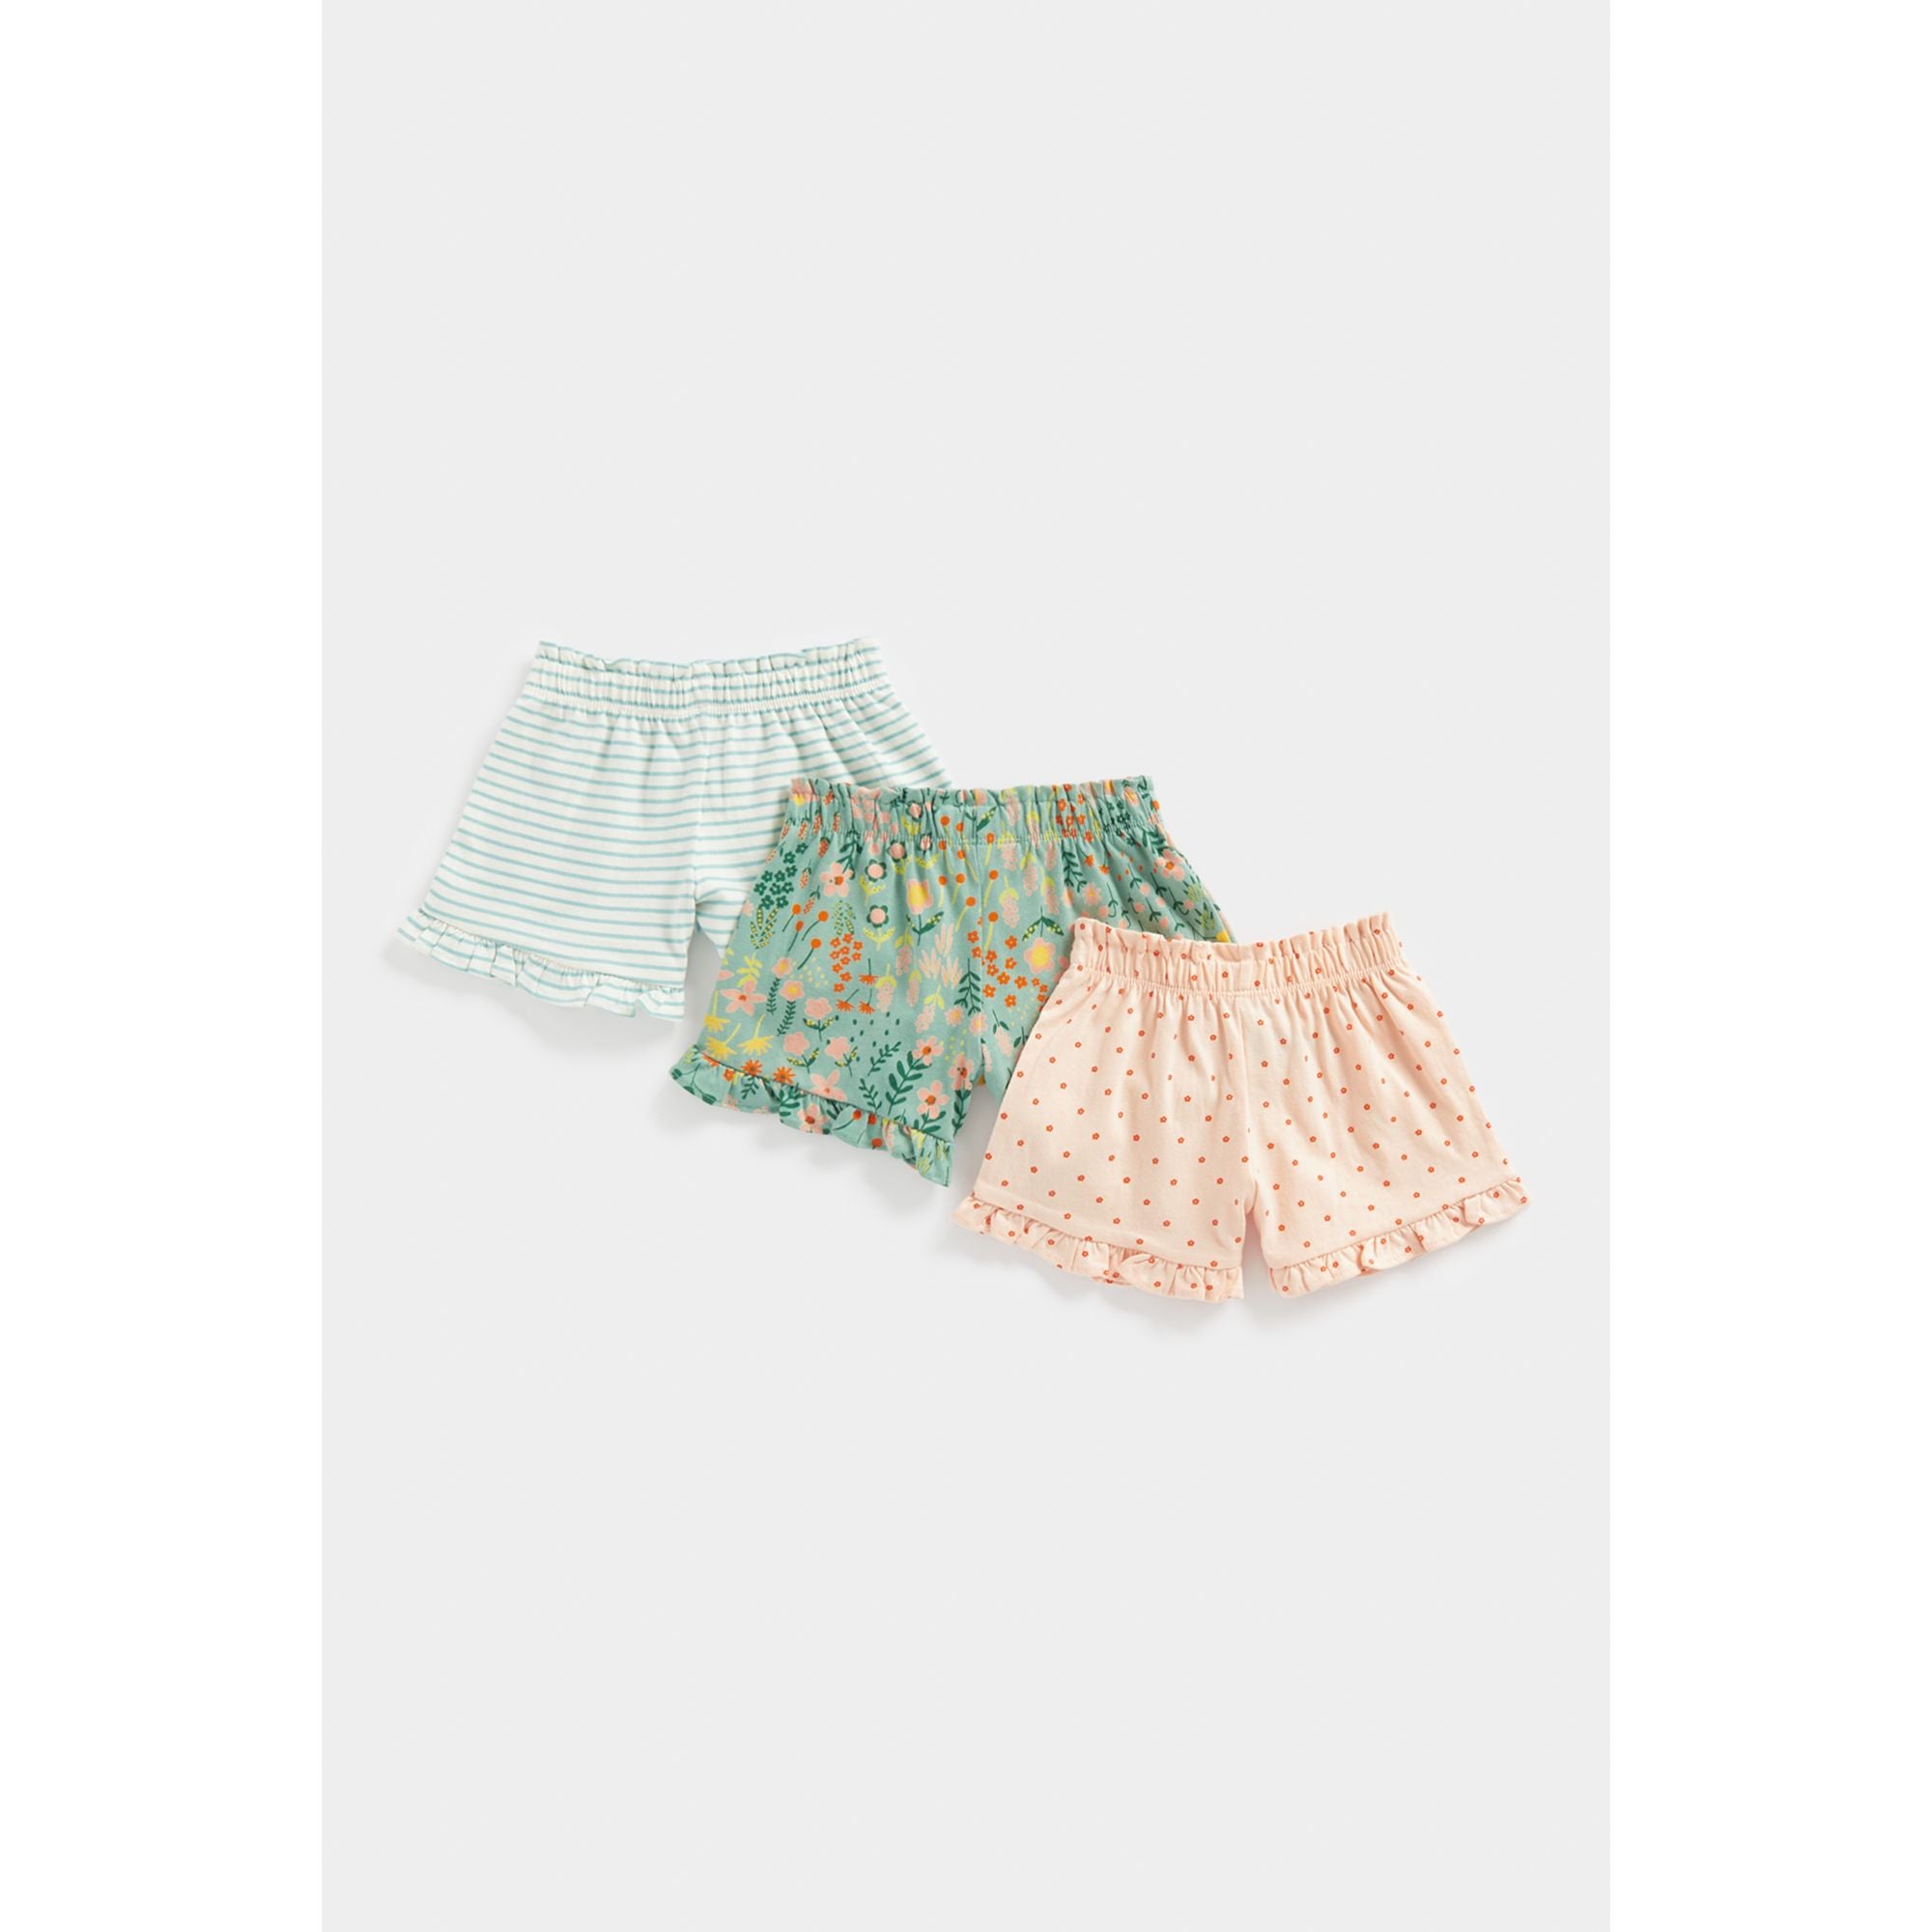 Mothercare Jersey Shorts - 3 Pack